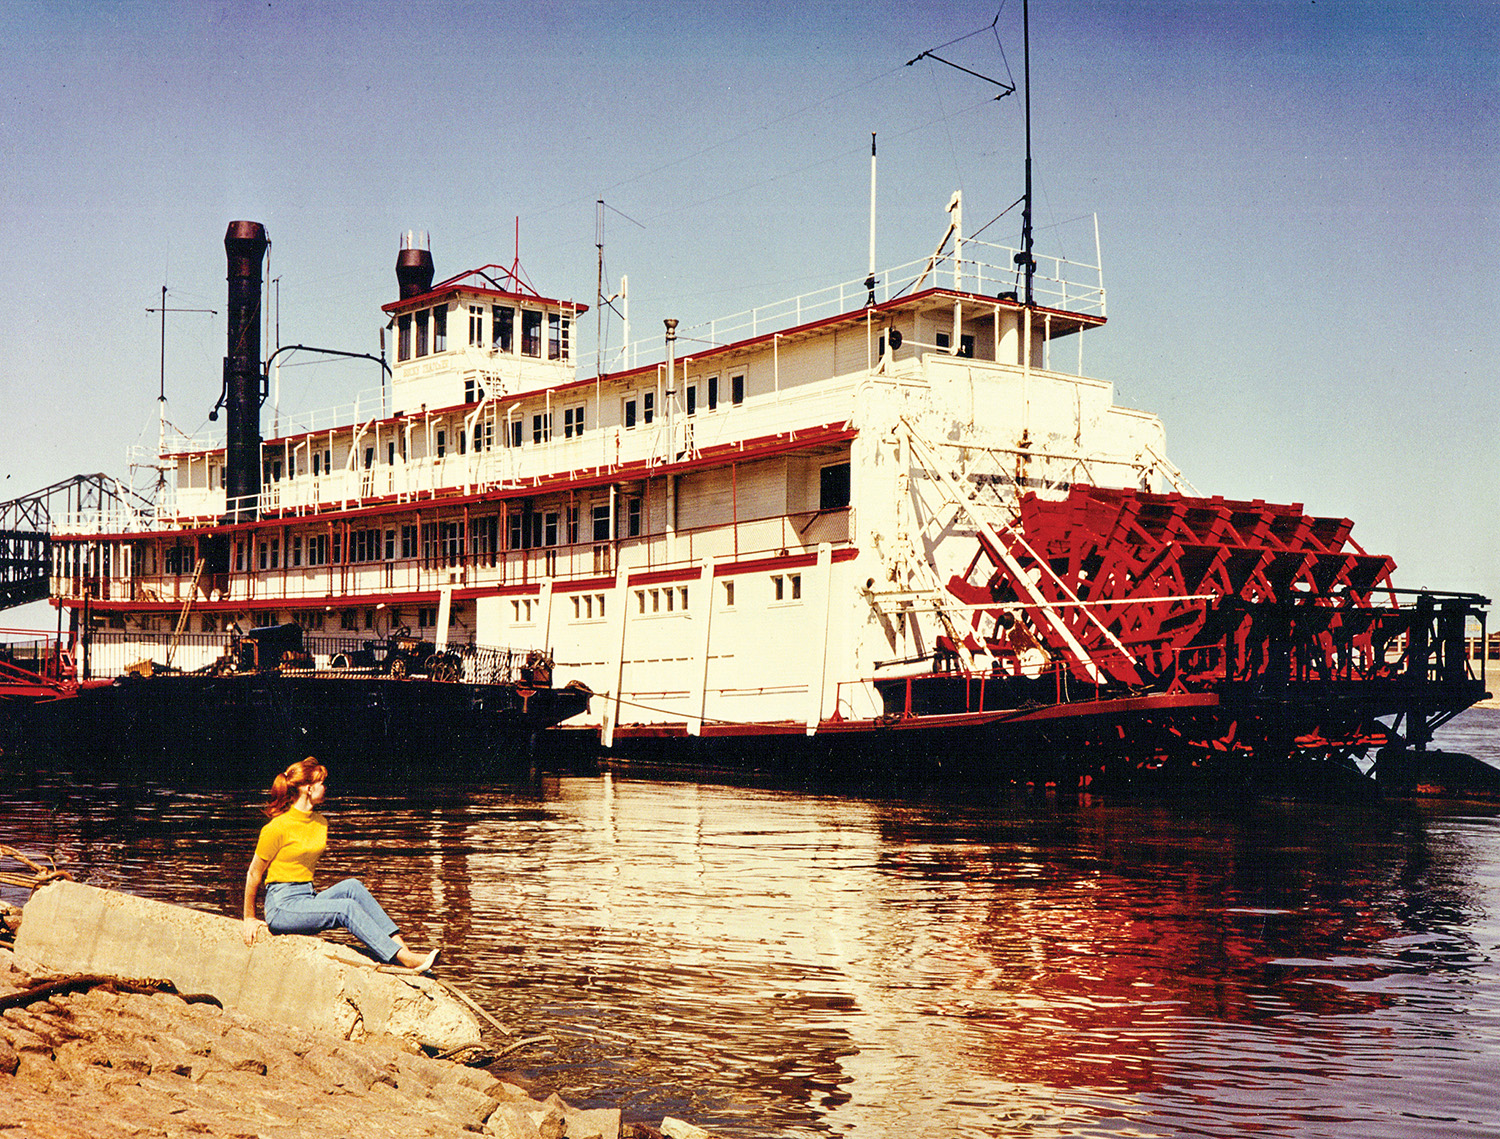 The Becky Thatcher (formerly the steamer Mississippi) at the St. Louis levee in 1968. (All photos from Keith Norrington collection)